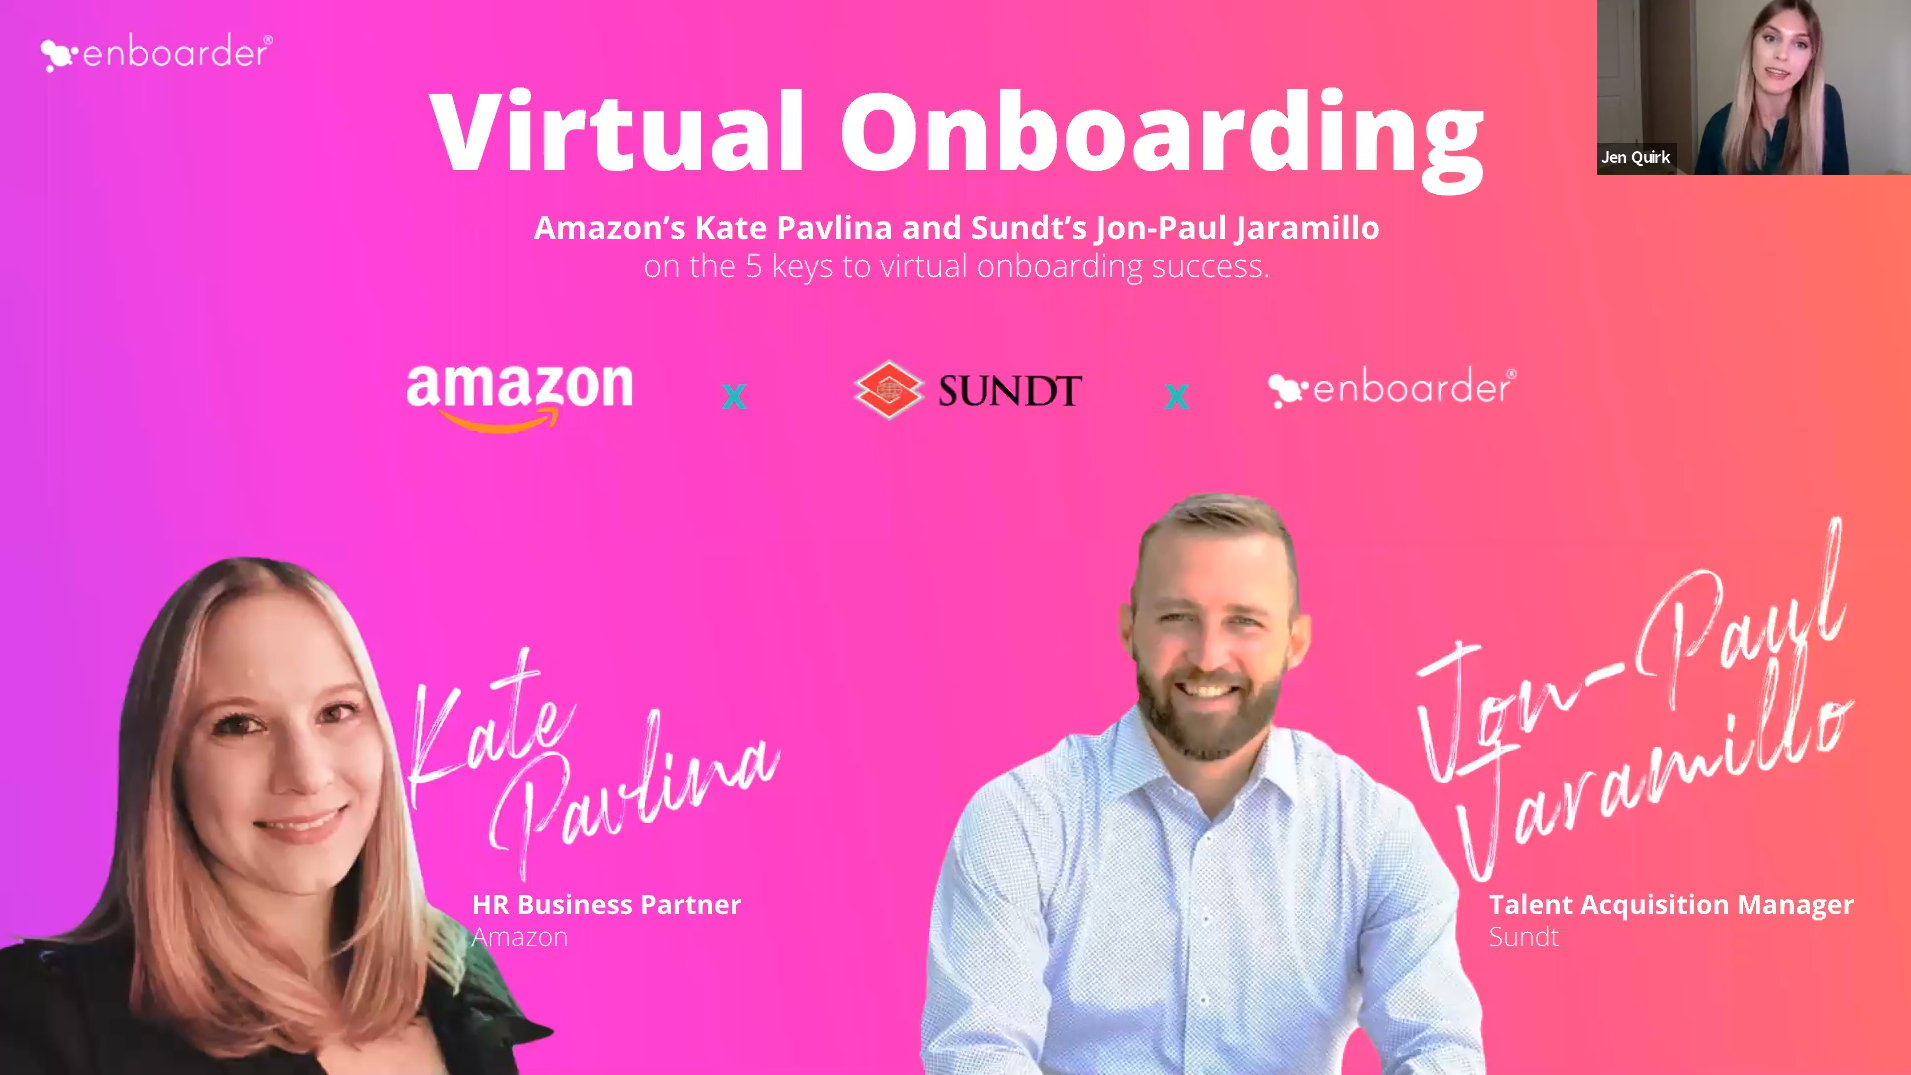 Virtual Onboarding: The 5 keys to success